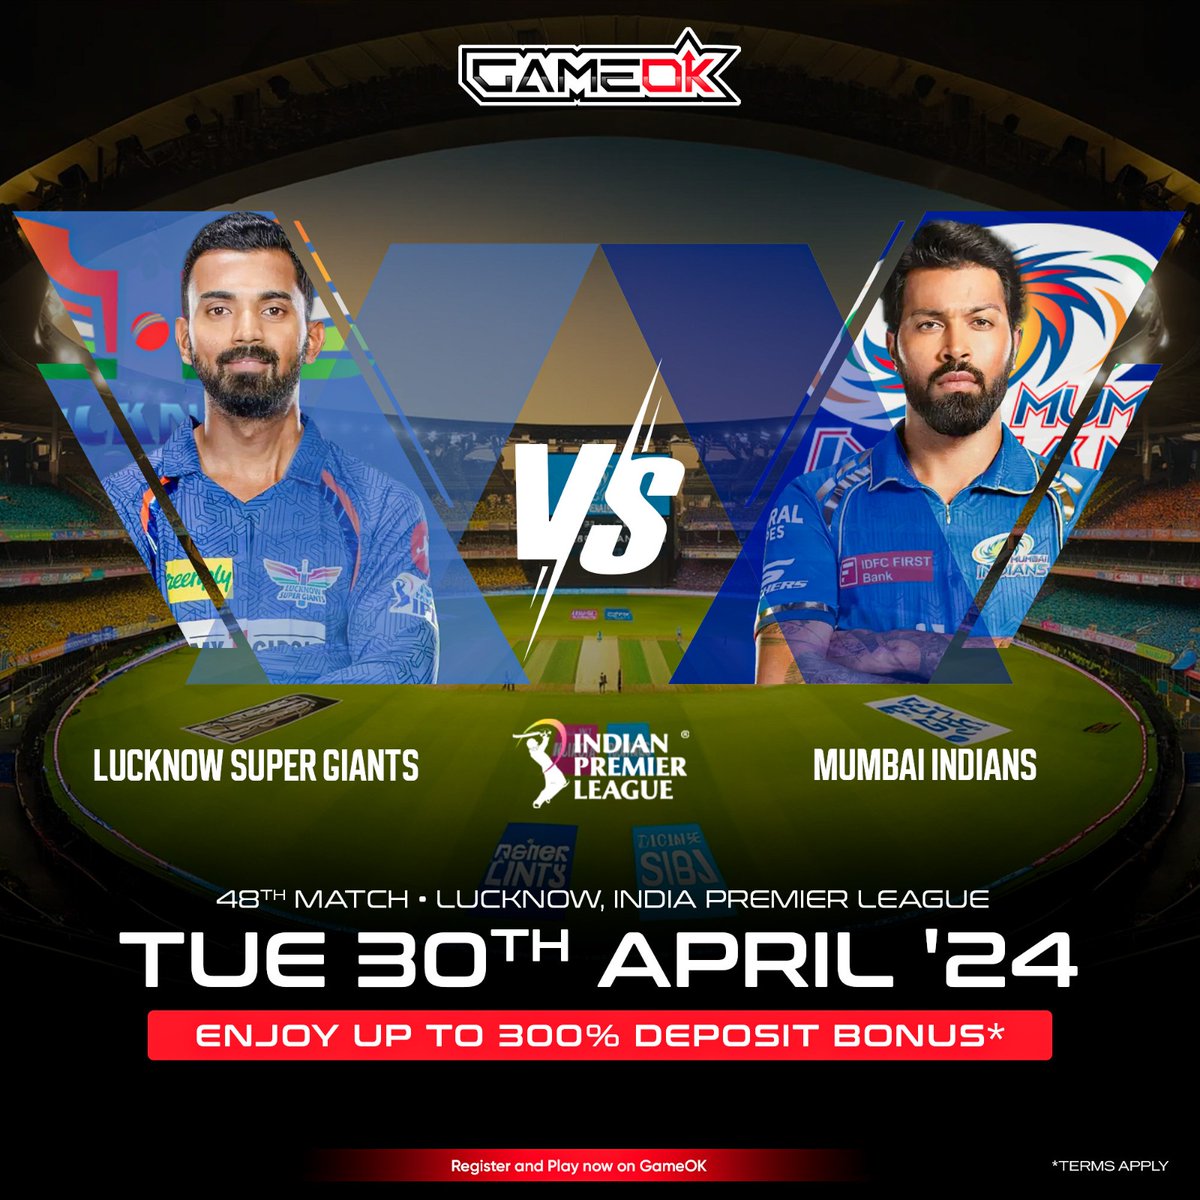 Are you ready for the epic match between Lucknow Super Giants vs Mumbai Indians in the IPL 2024❓
Who will win❓
Watch the Match for Free
You can also get a chance to win a 300% deposit bonus!🏏

#IPL2024 #CSLvsSRH #TataIPL #GujaratTitans #RoyalChallengersBengaluru #IPLMatchday…